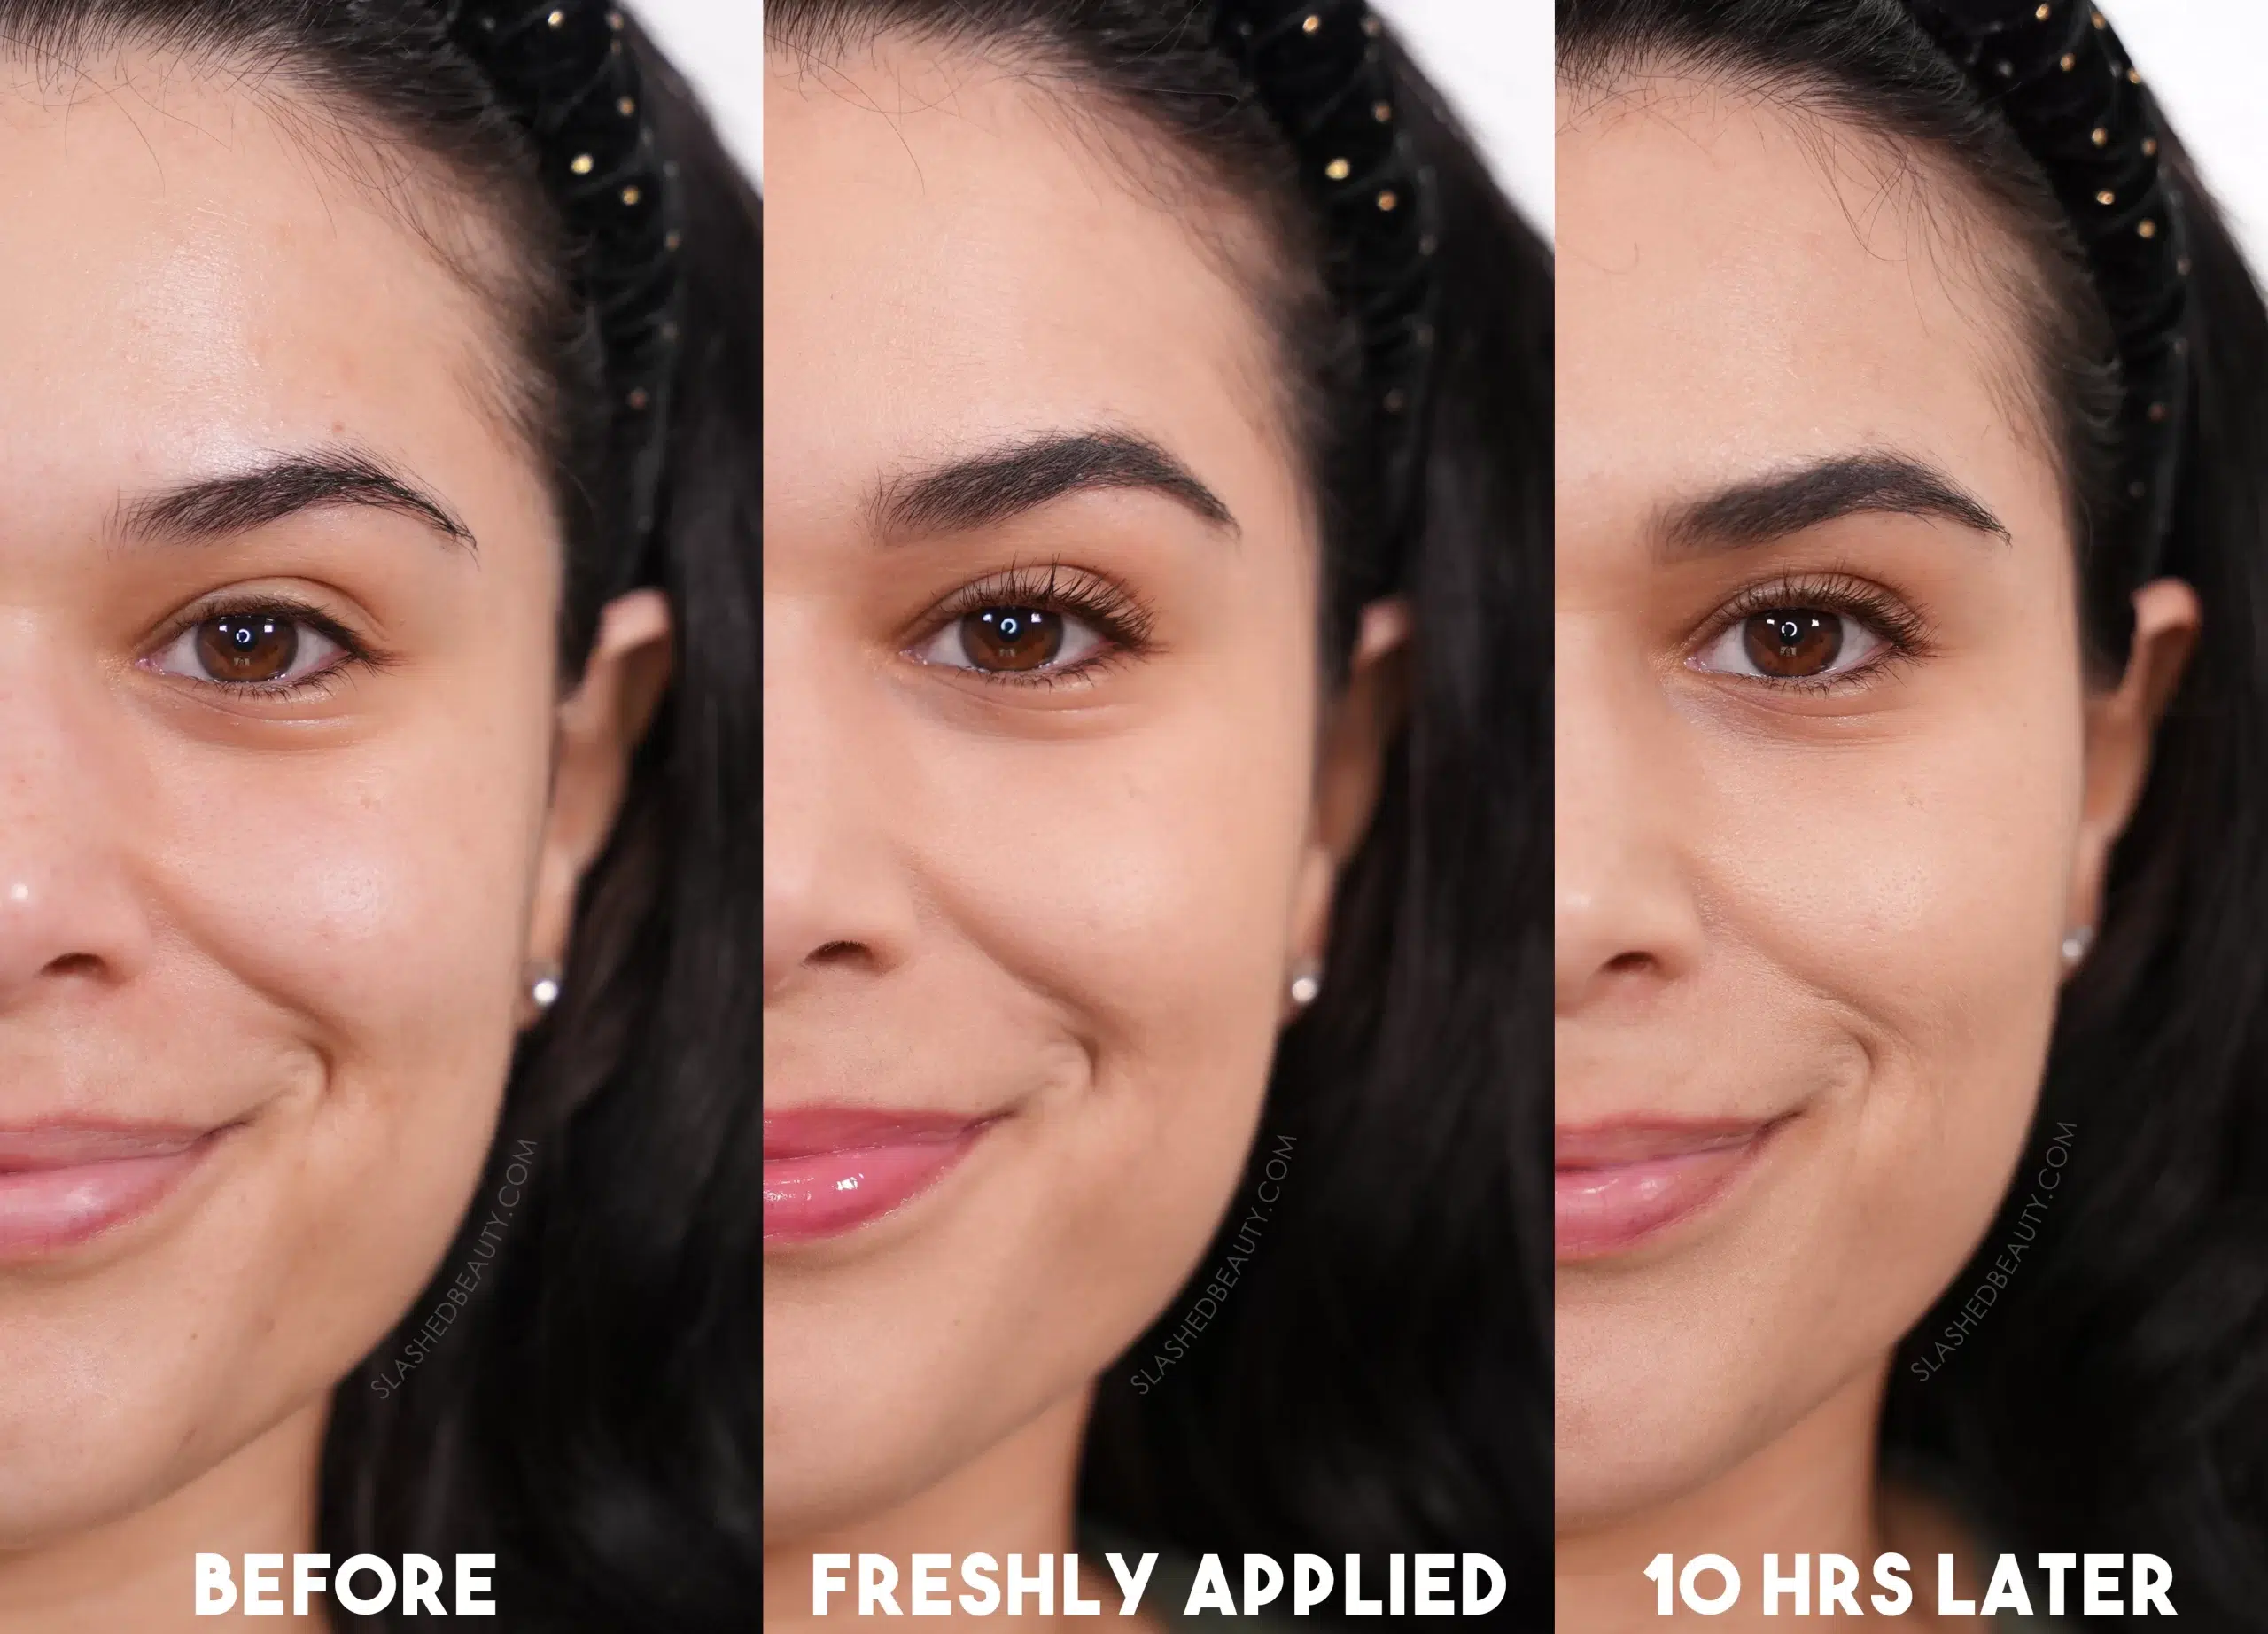 Side by side comparison of bare face next to L'Oreal Infallible Powder Foundation freshly applied, then 10 hours later. | Top 4 Drugstore Powder Foundations Tested Before & After | Slashed Beauty